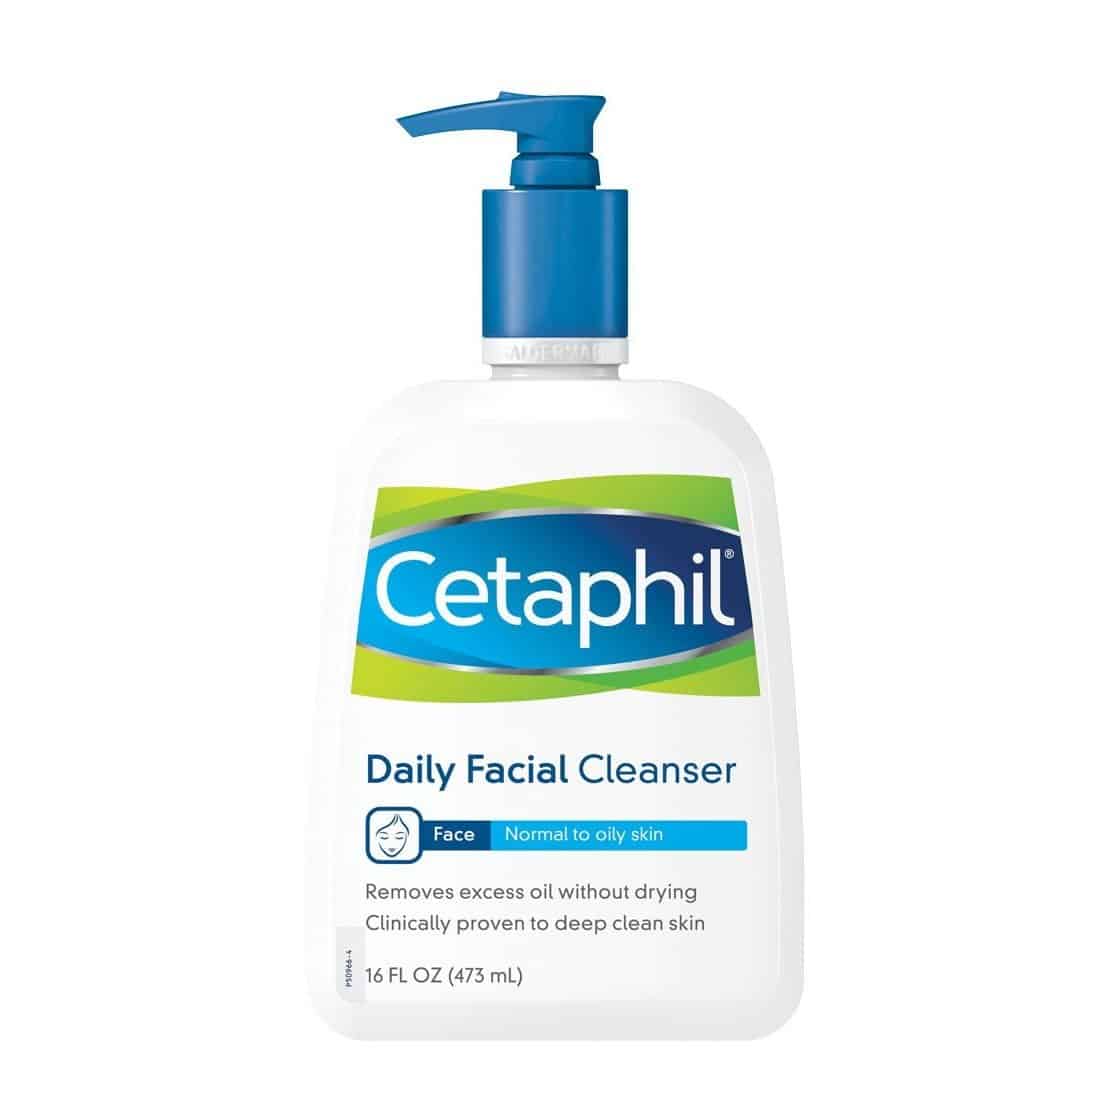 cetaphil daily facial cleanser price in pakistan